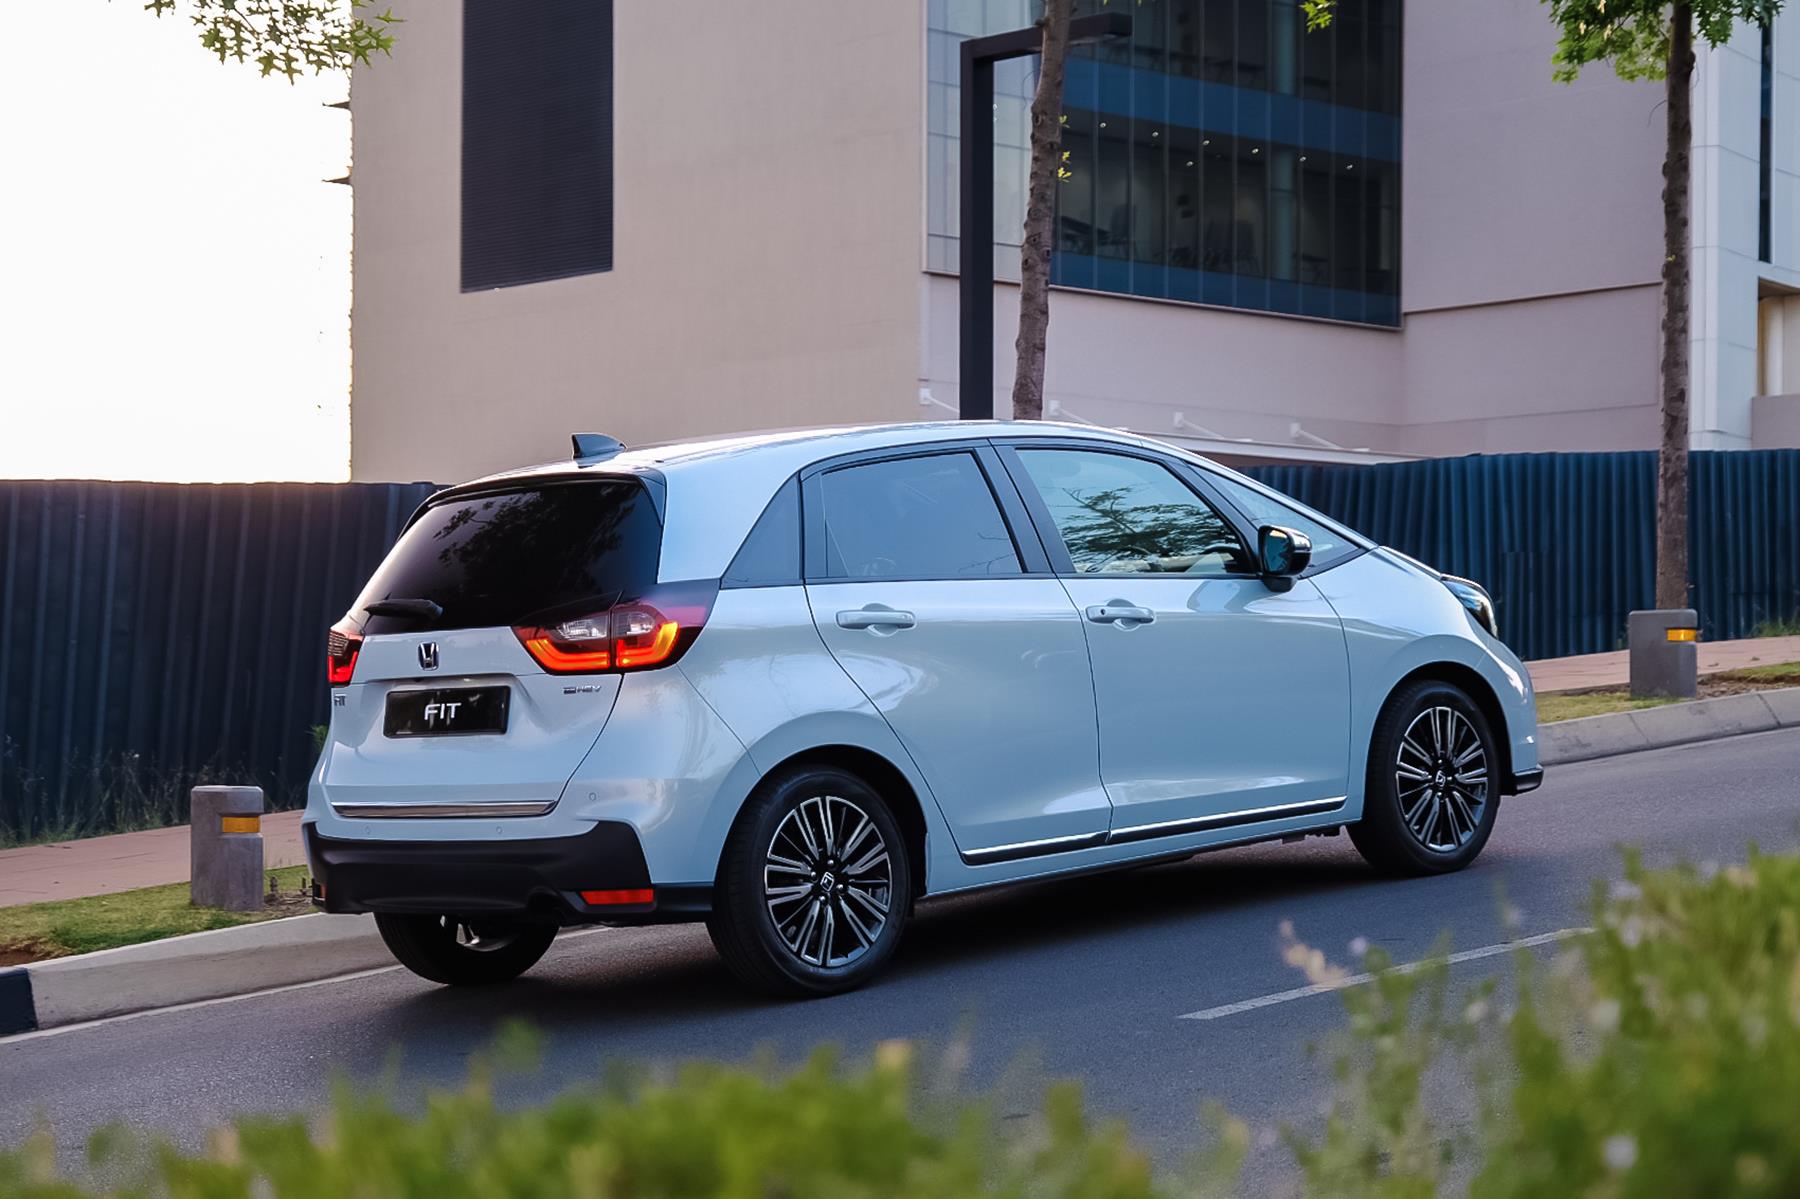 Honda FIT eHEV received a facelift late last year